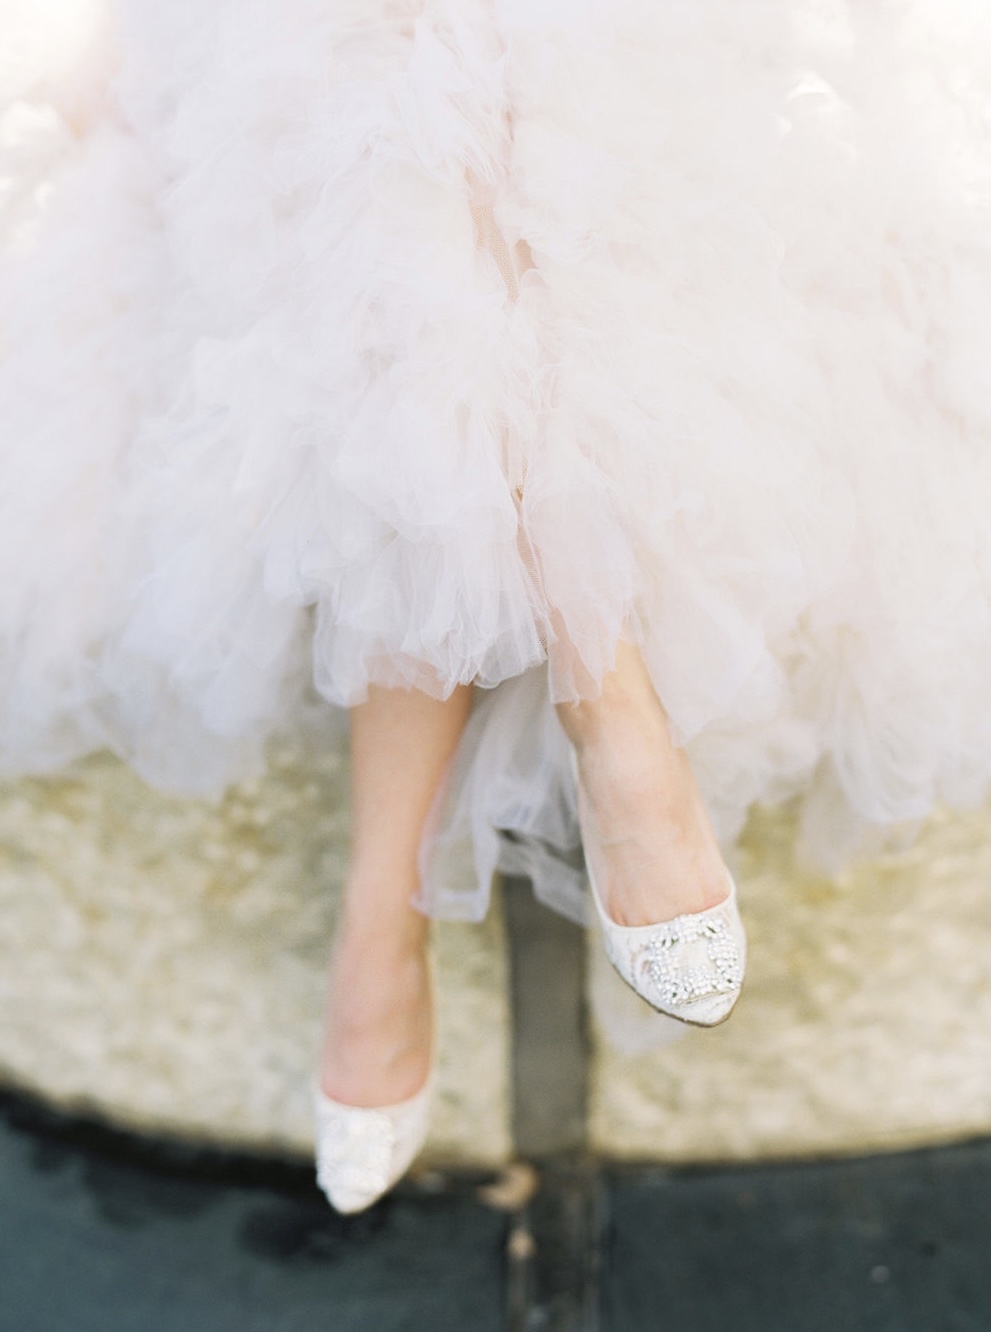 Manolo Blahnik Heels and Millia London Couture | Miss Madeline Rose